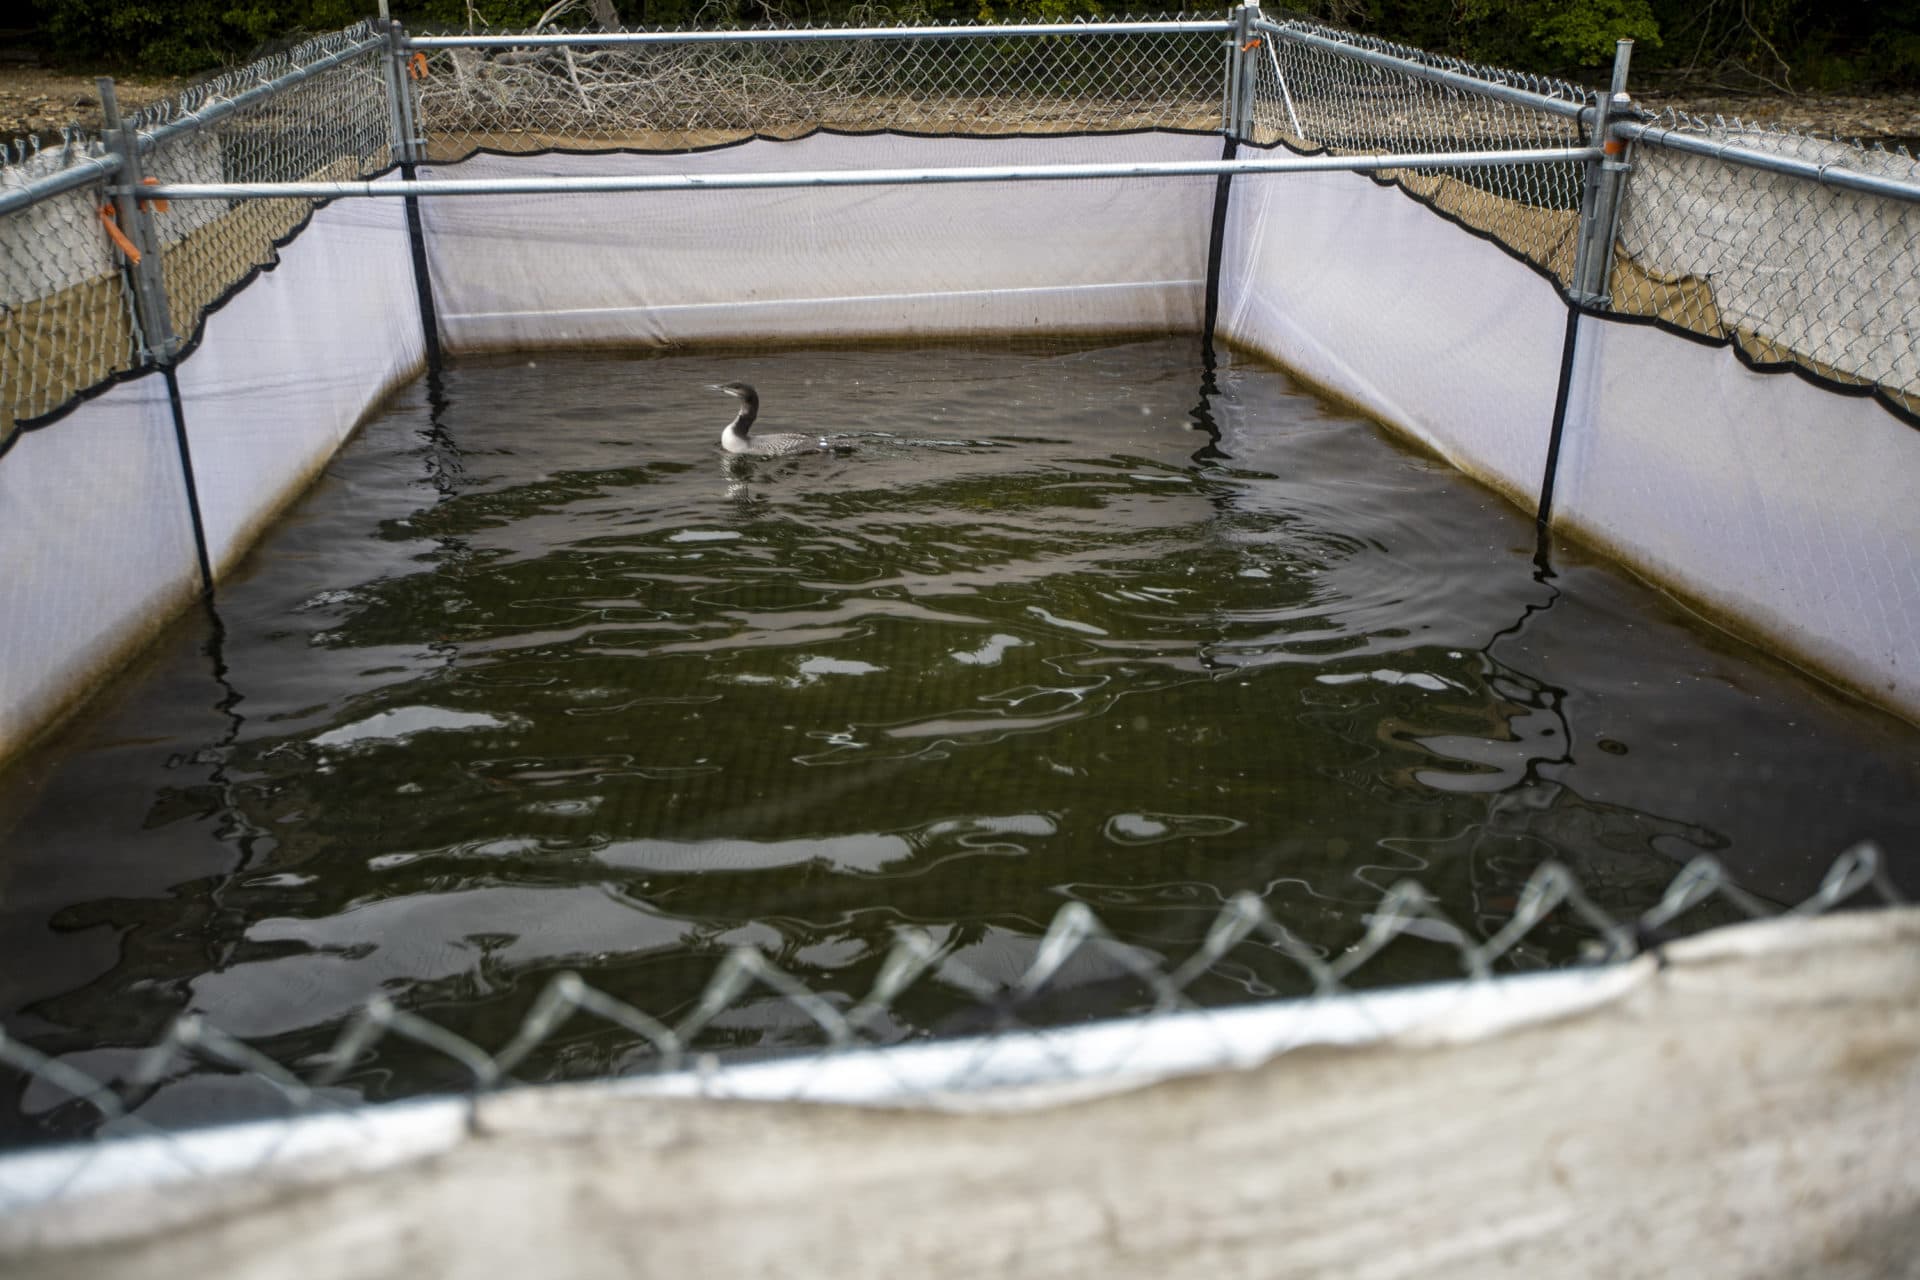 A young loon chick floats in one of the rearing pens at Lakeville, Massachusetts. The chicks will stay in the rearing pens until they are about 10 weeks old before being released. (Jesse Costa/WBUR)